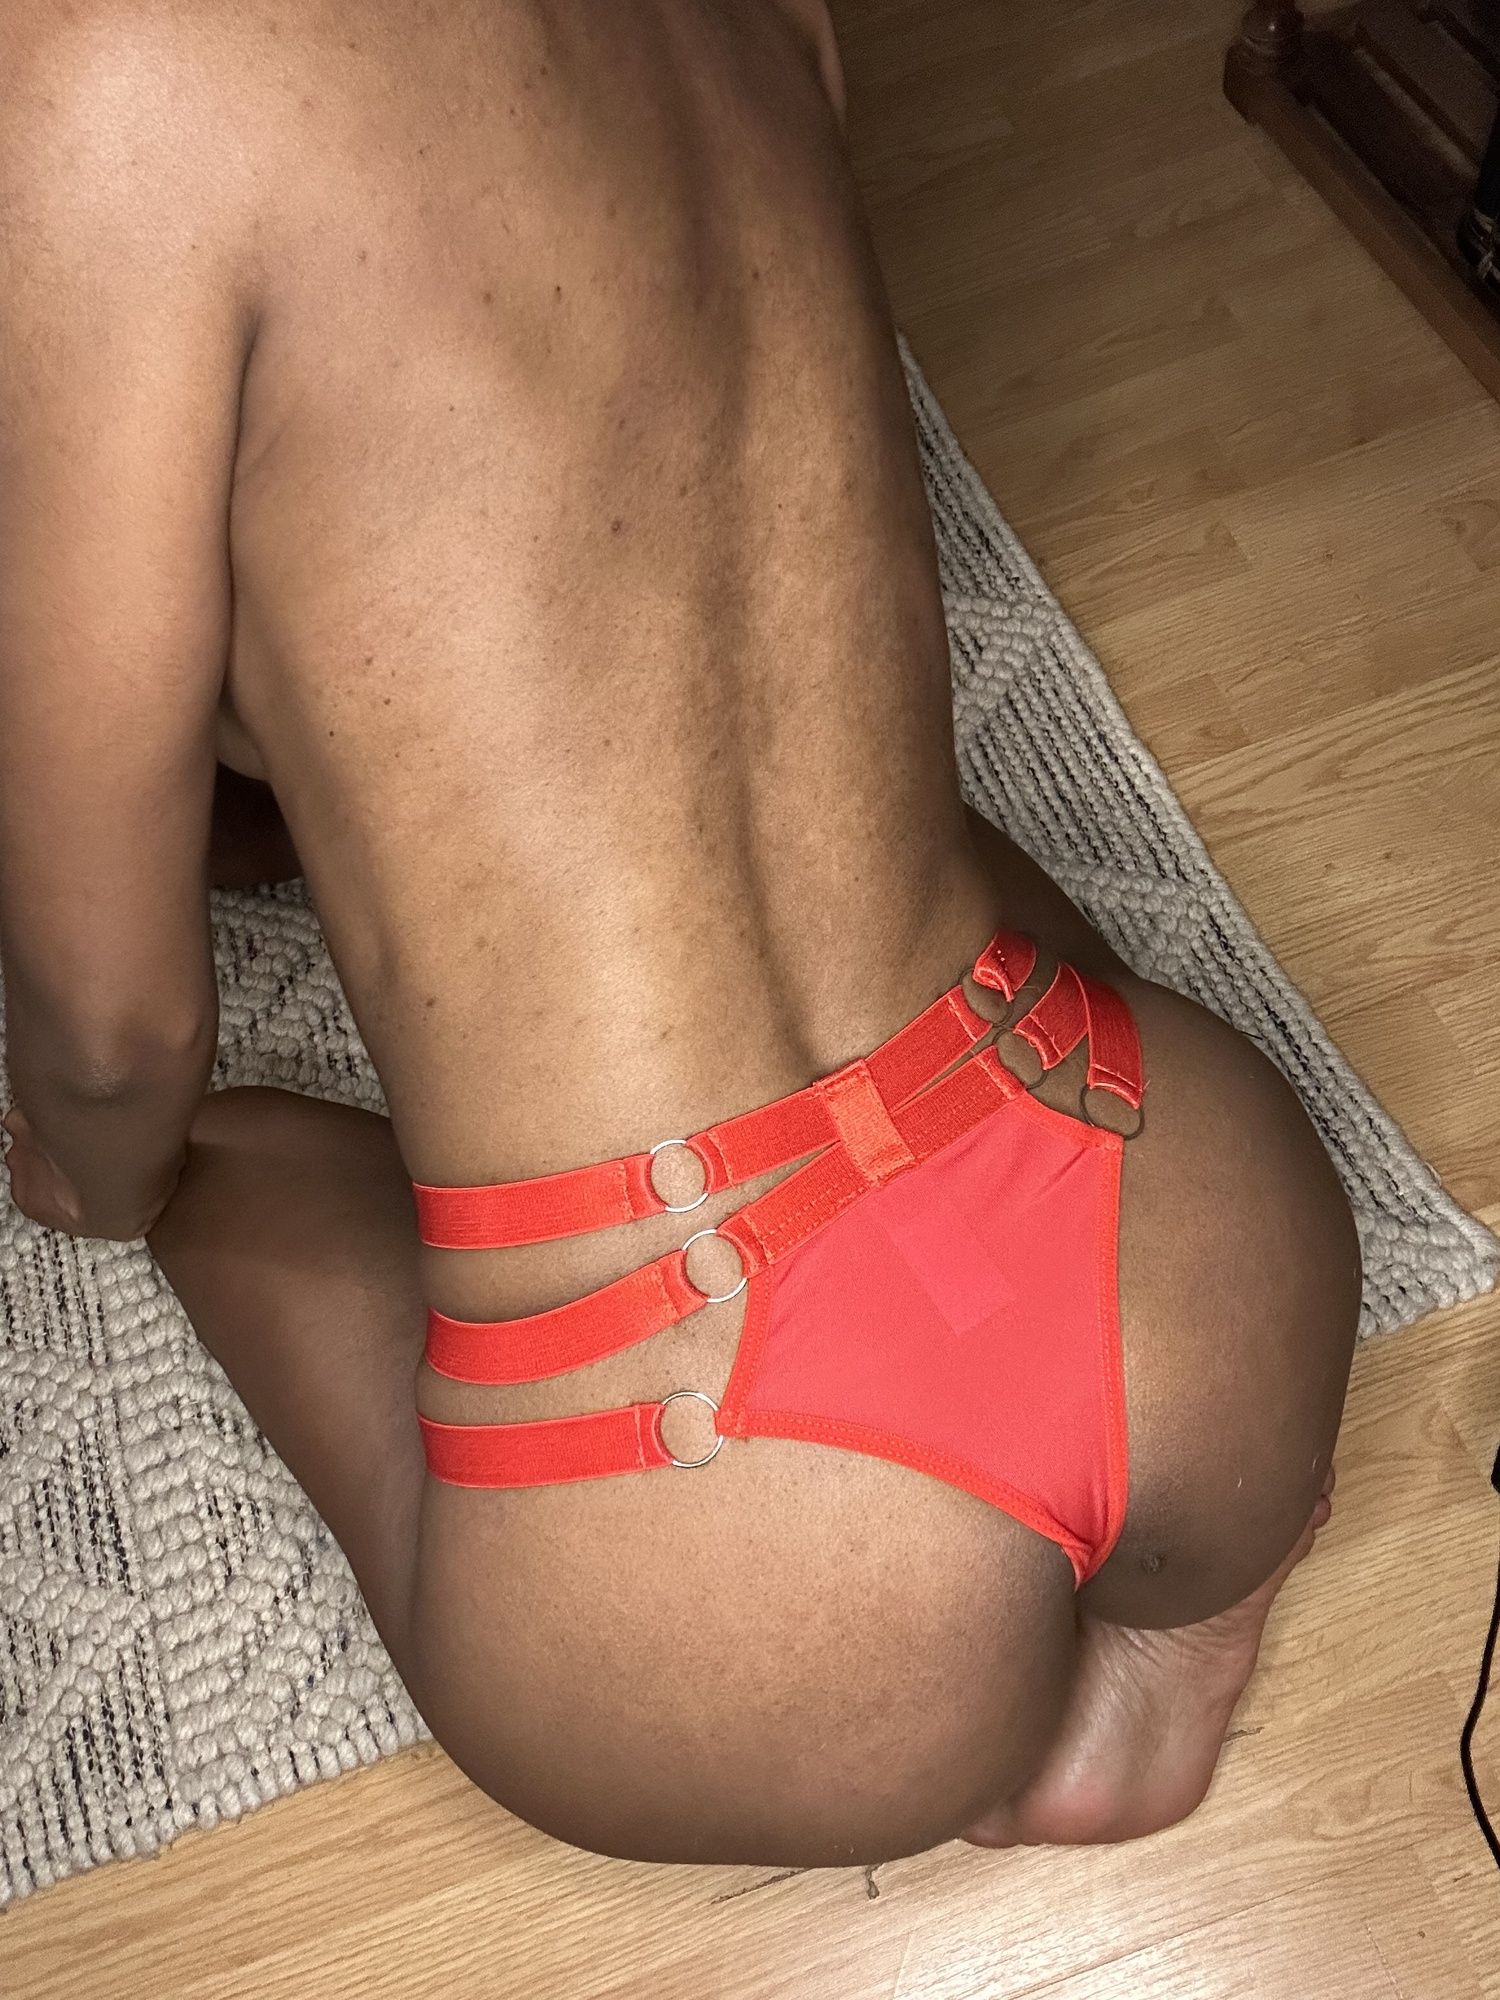 Skinny Ebony with Small Ass and Tits in Red Lingerie 